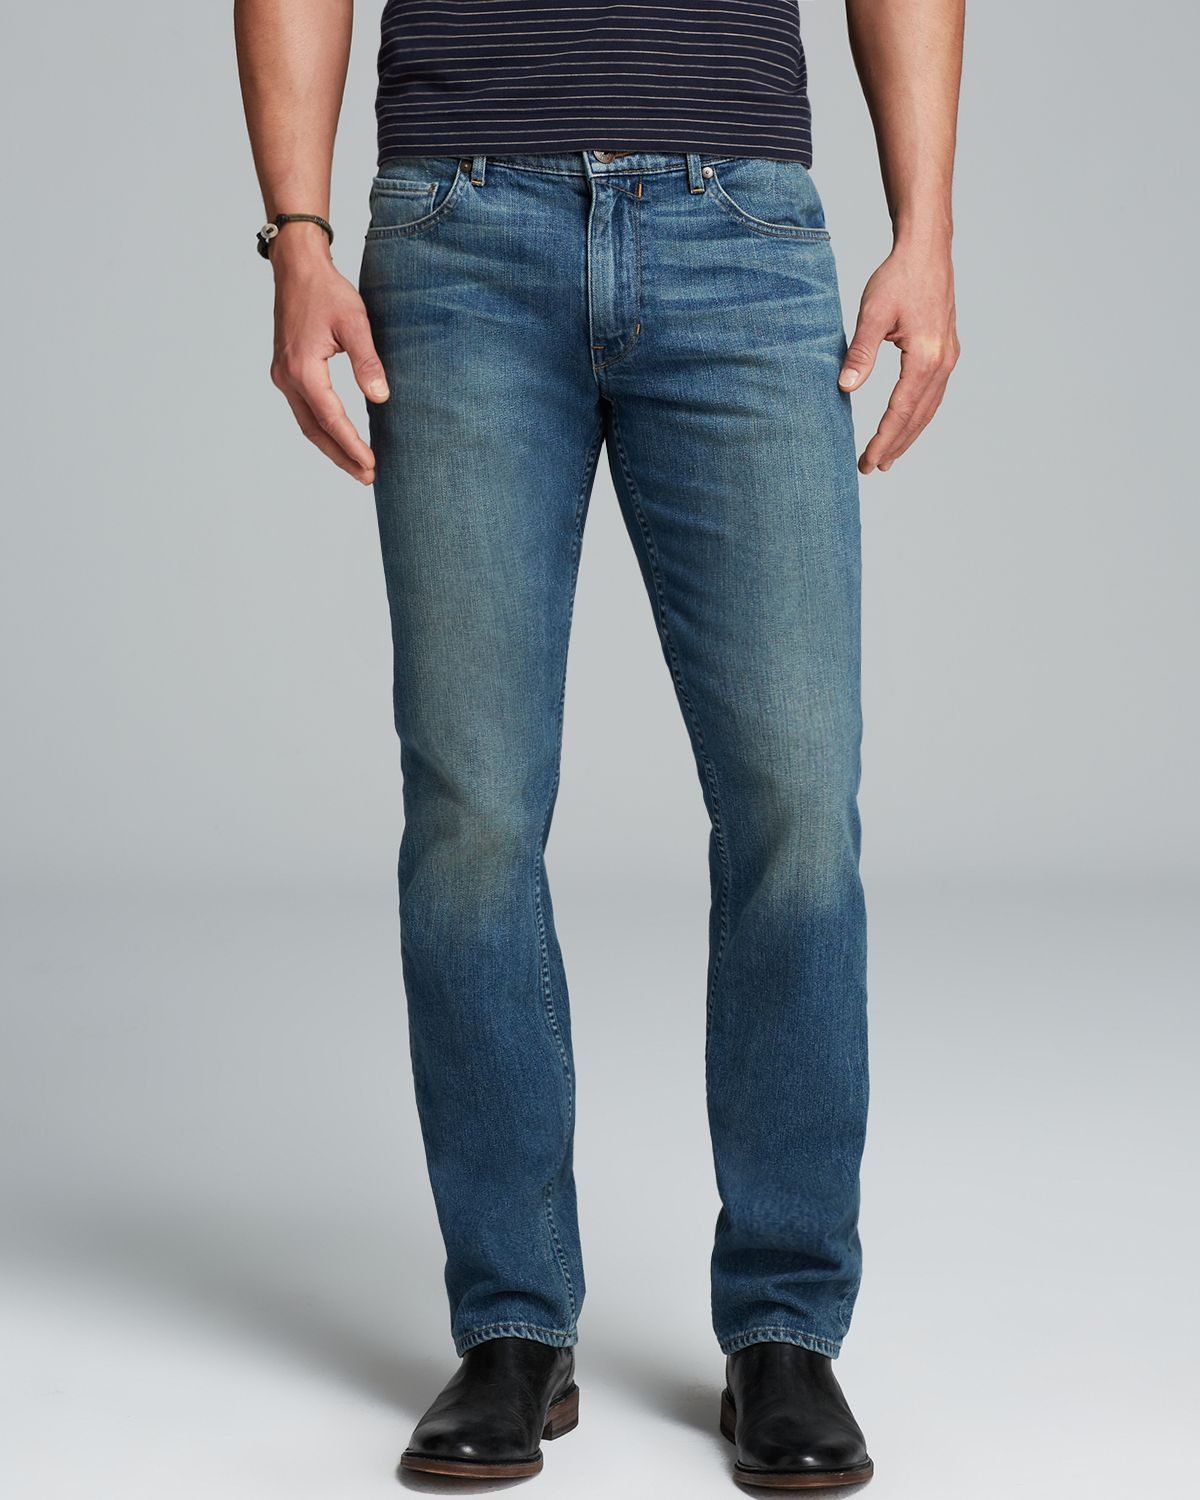 Paige Paige Premium Denim Jeans - Normandie Straight Fit In Poster in ...